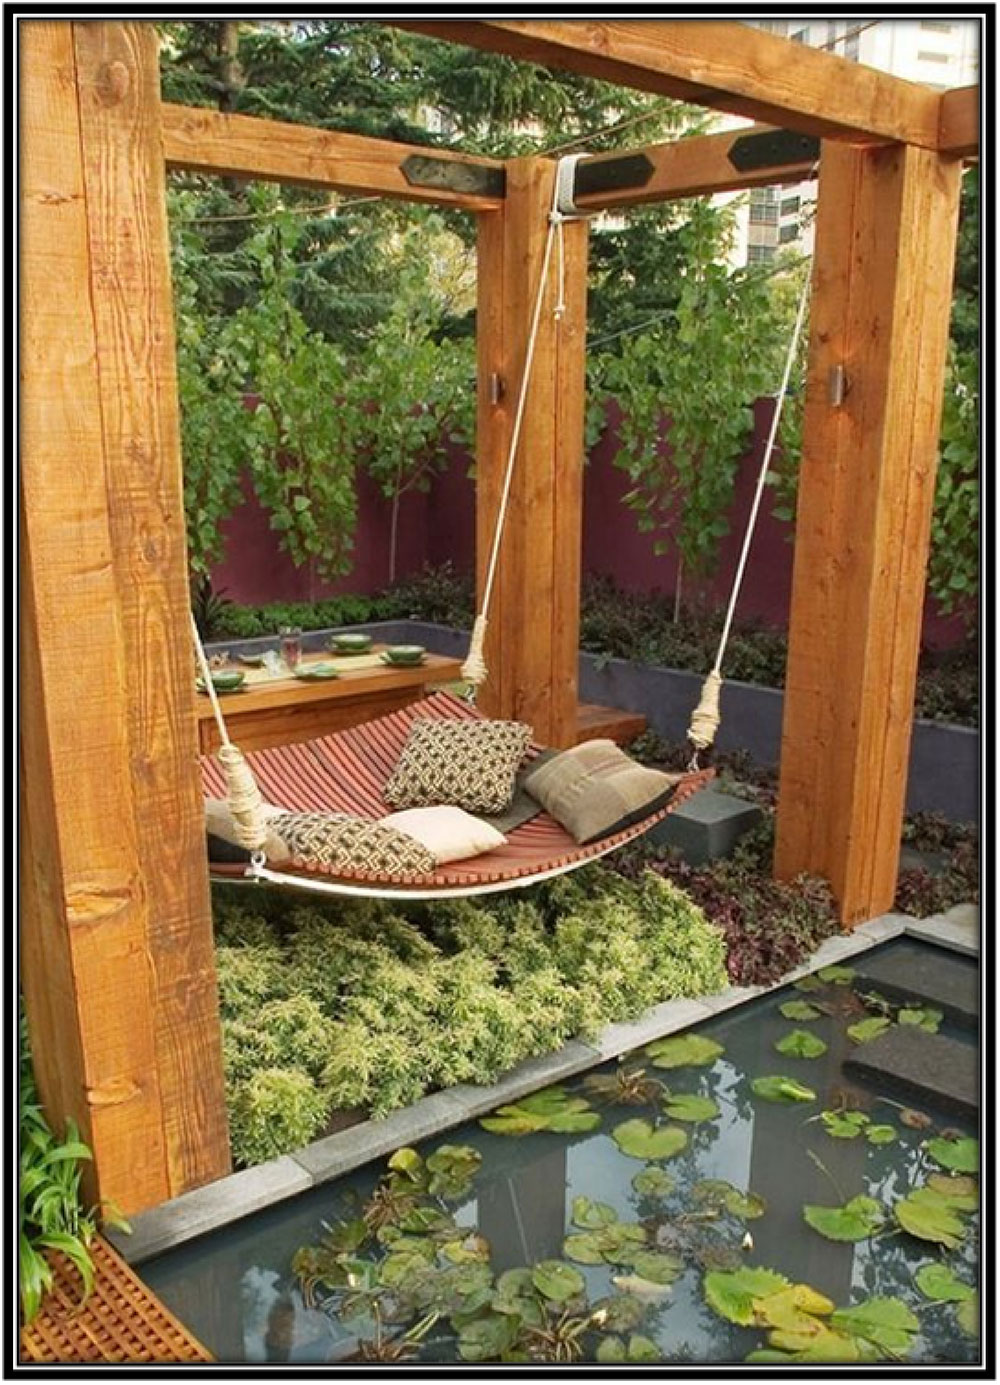 Hanging-bed-in-the-garden-Home-decor-ideas